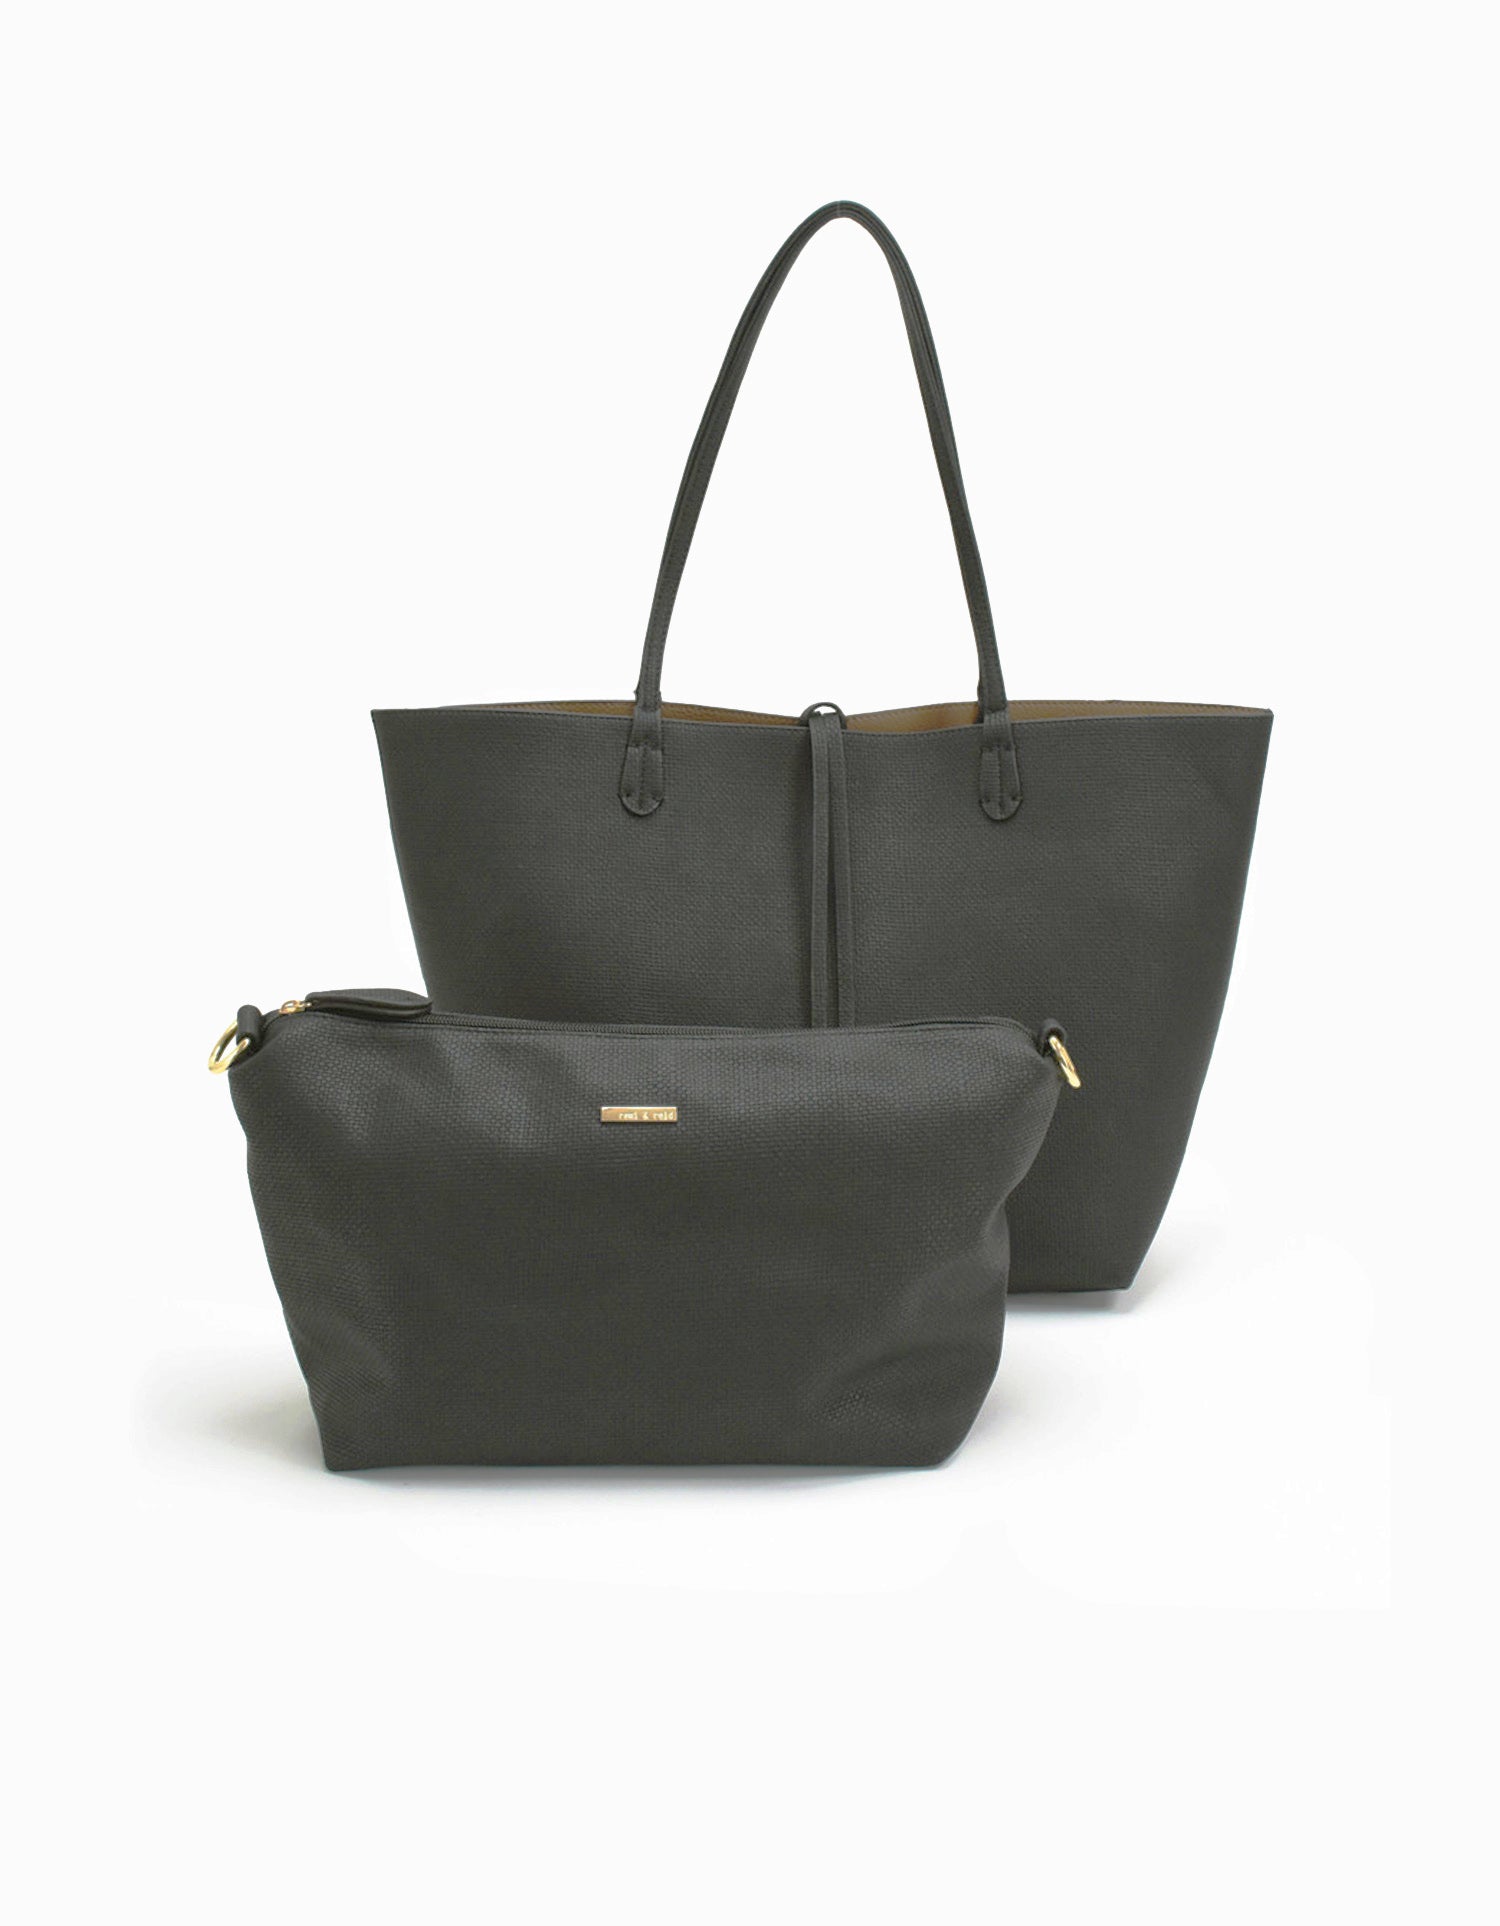 DEPARTURE TOTE GREY/TAUPE